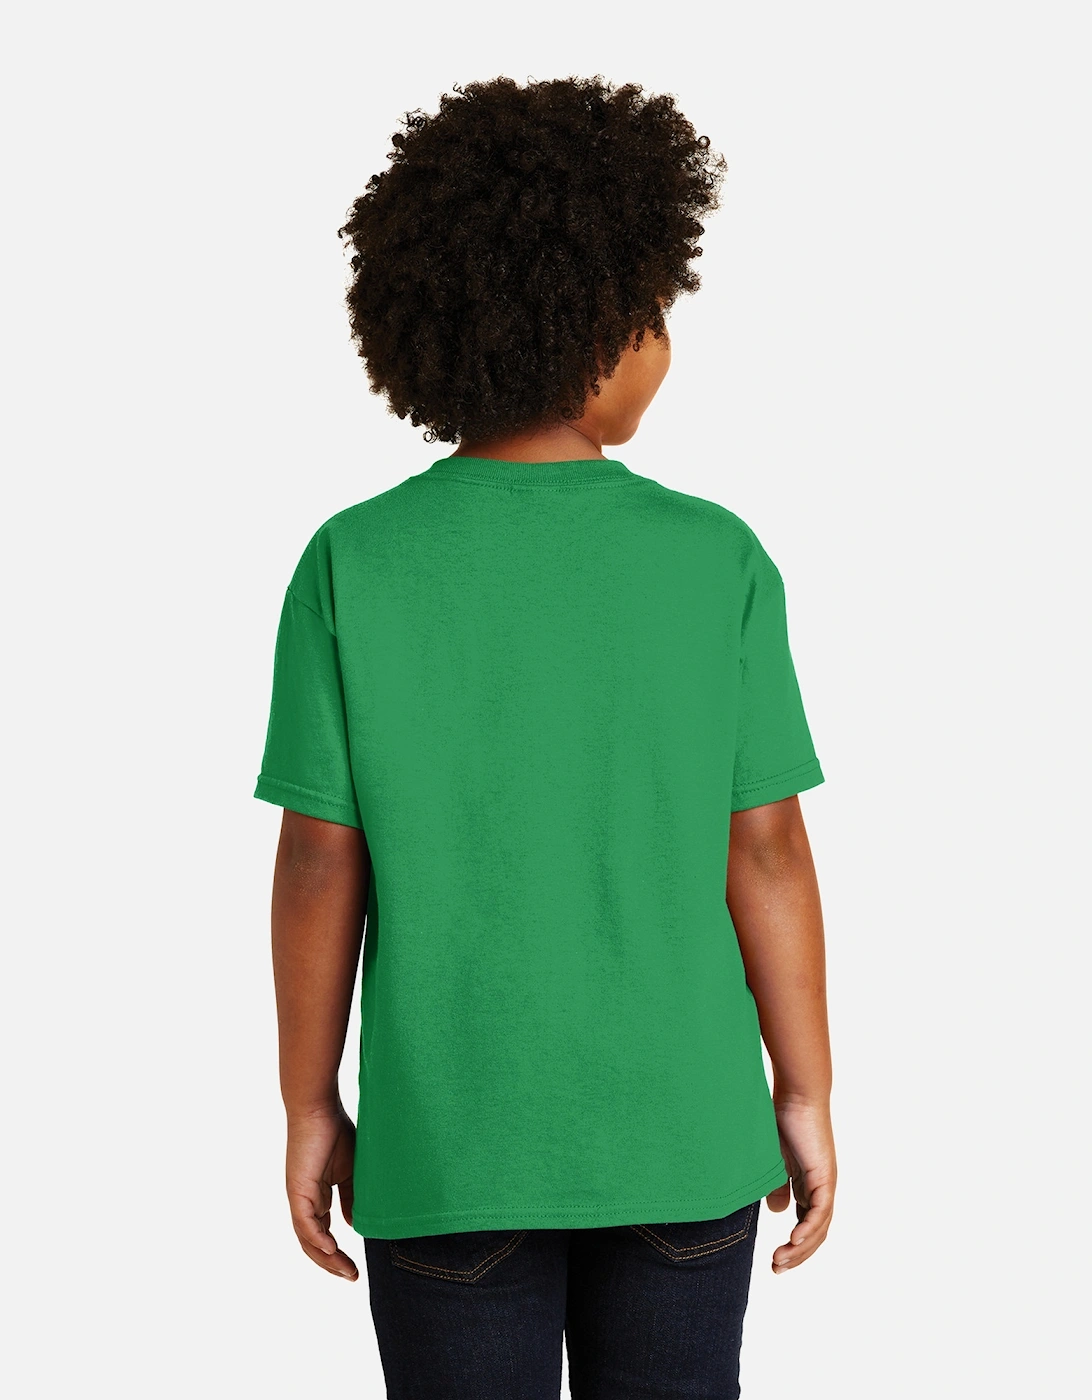 Childrens Unisex Soft Style T-Shirt (Pack Of 2)